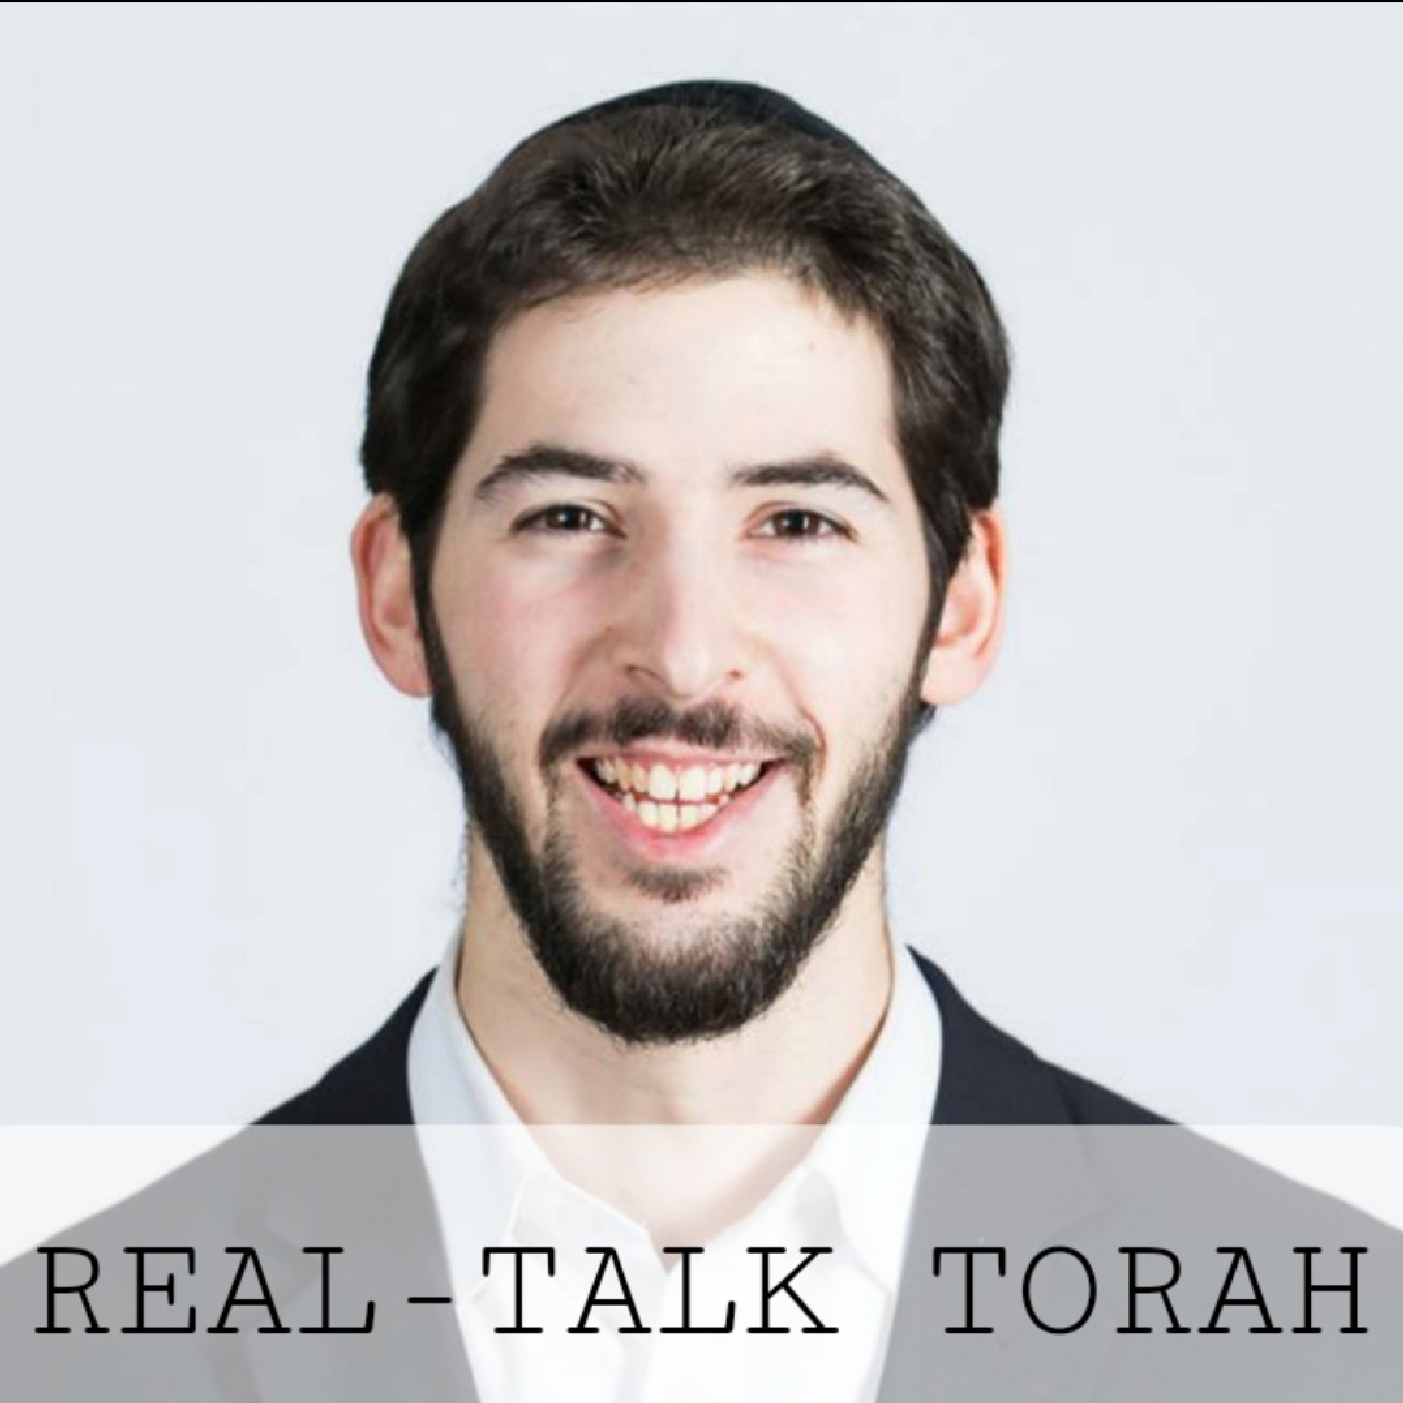 Real-Talk Torah: Why Take a Field Day on Lag BaOmer? 🏹